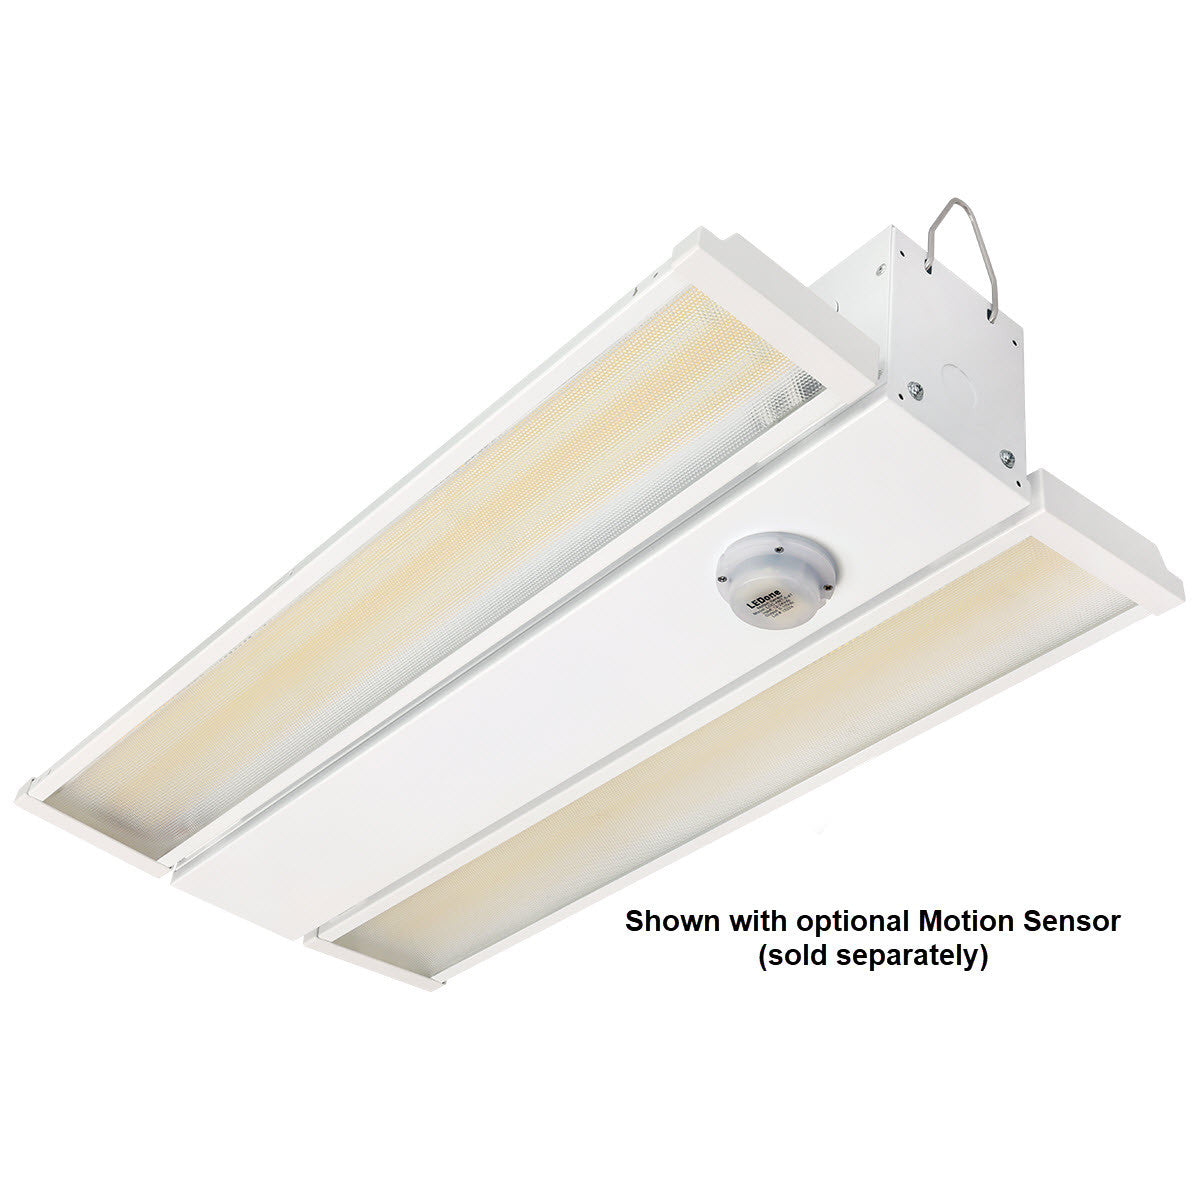 Foldable 2 Foot Linear High Bay, 14,850 Lumens, 70W/90W/110W Selectable, 5000K, 0-10V Dimmable, 120-277V, White Finish